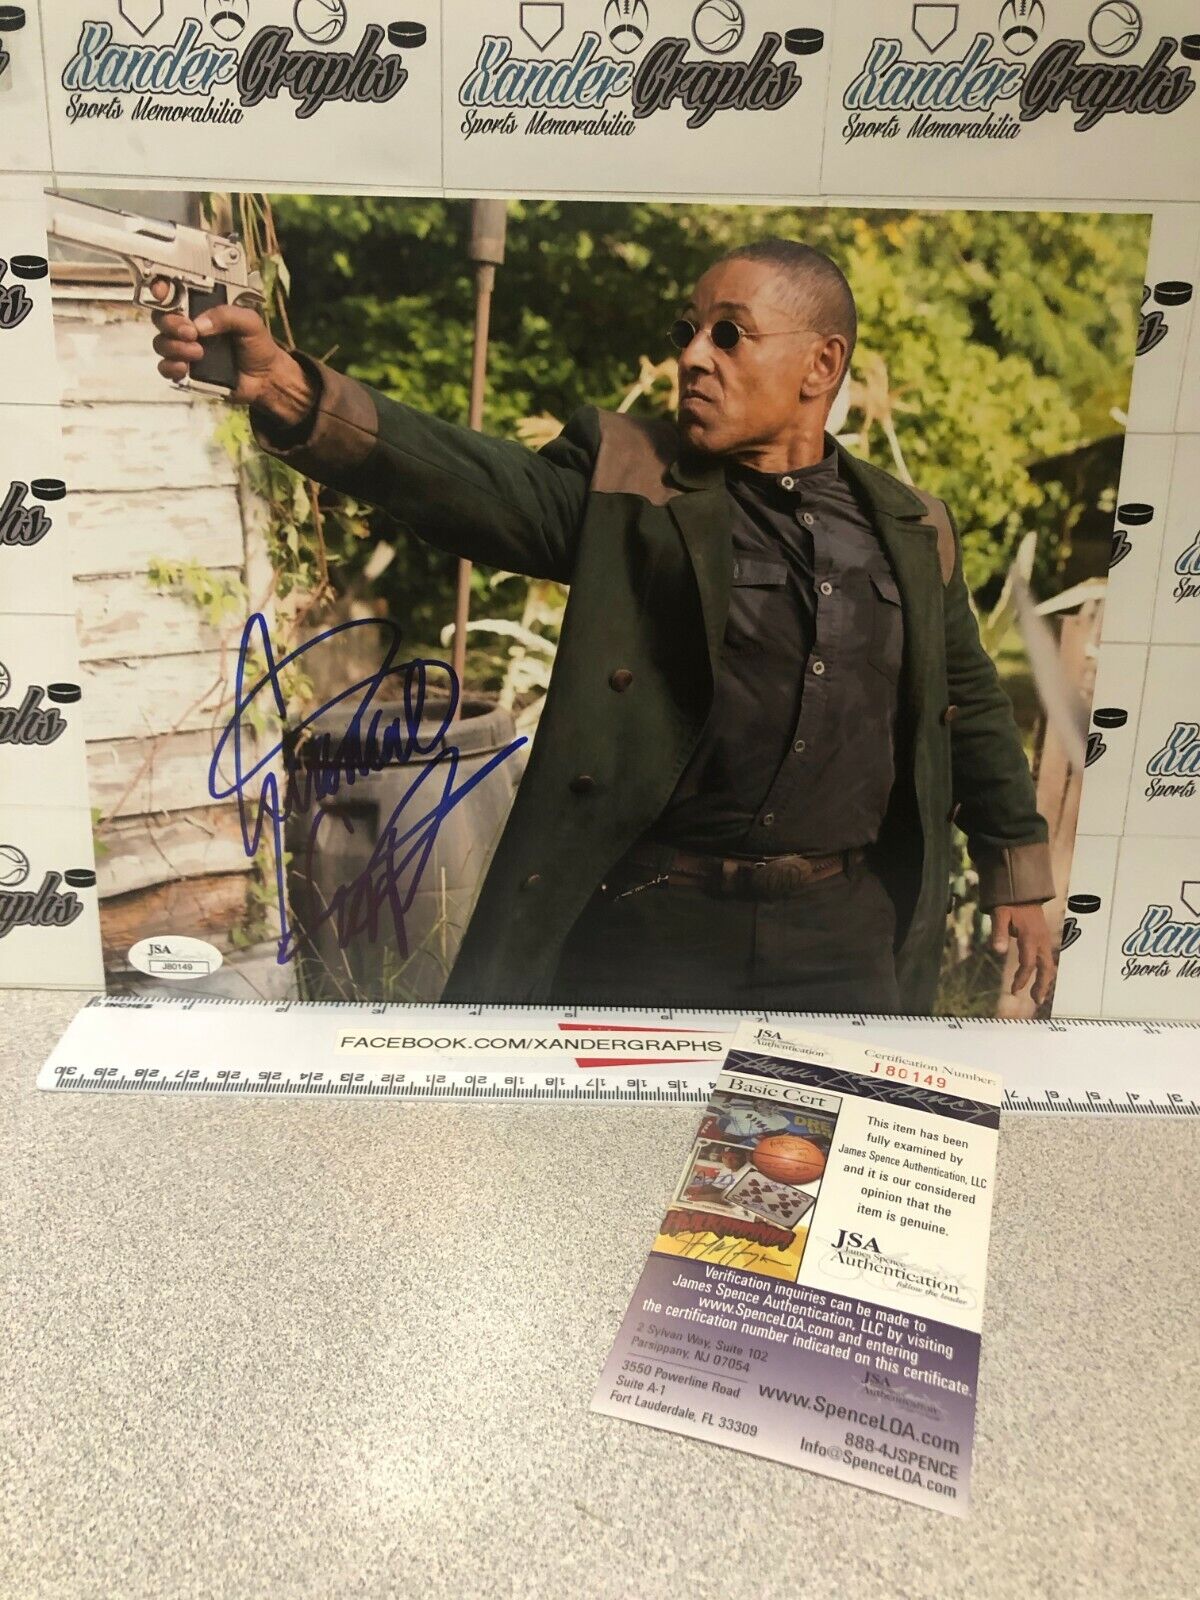 GIANCARLO ESPOSITO GUS FRING SIGNED AUTOGRAPHED 8X10 Photo Poster paintingGRAPH-JSA COA